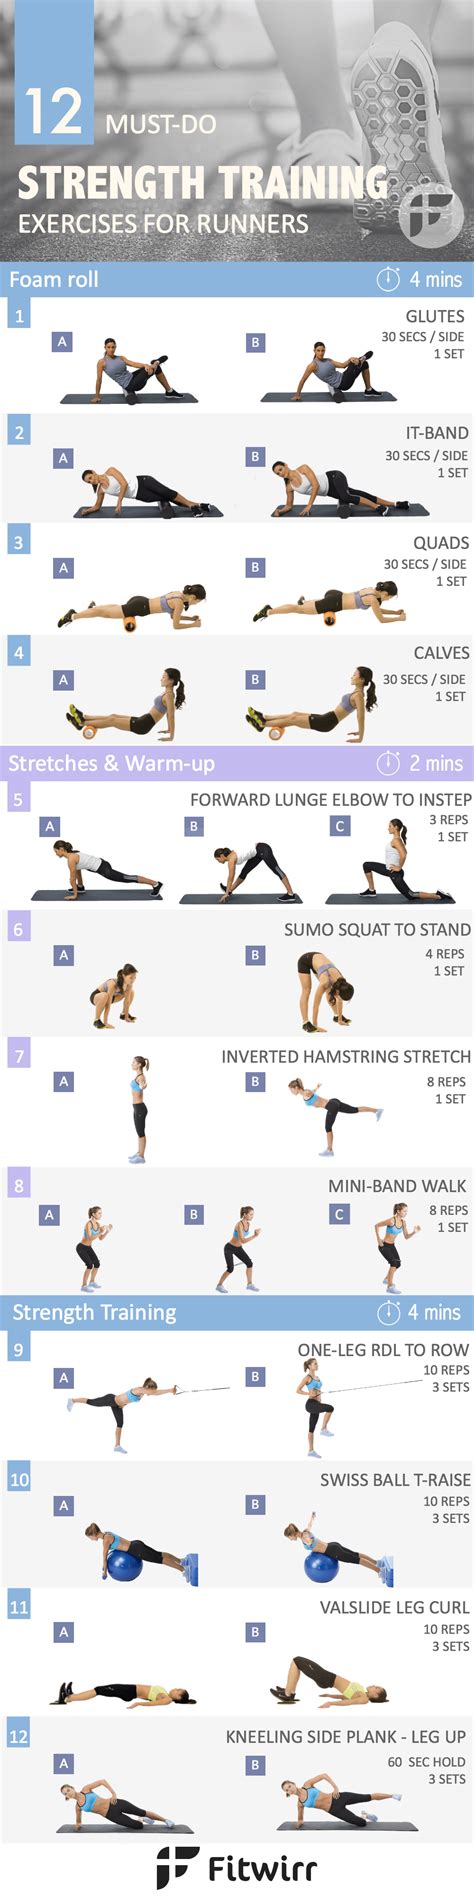 Strength Training Exercises OFF